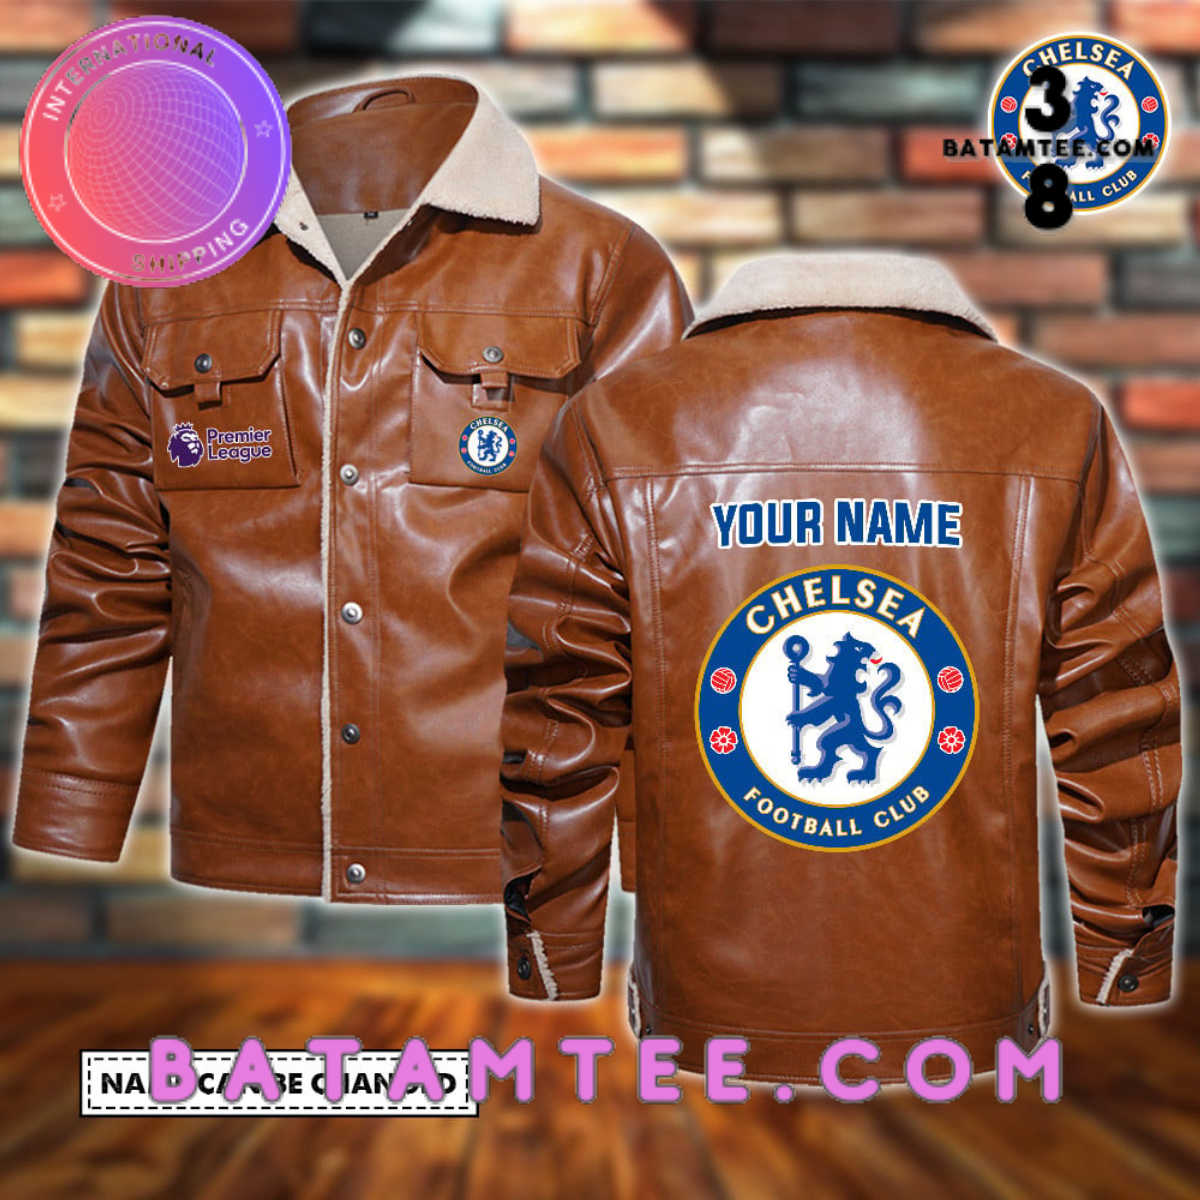 Personalized Leather jacket for Chelsea FC fans-Limited Edition's Overview - Batamtee Shop - Threads & Totes: Your Style Destination